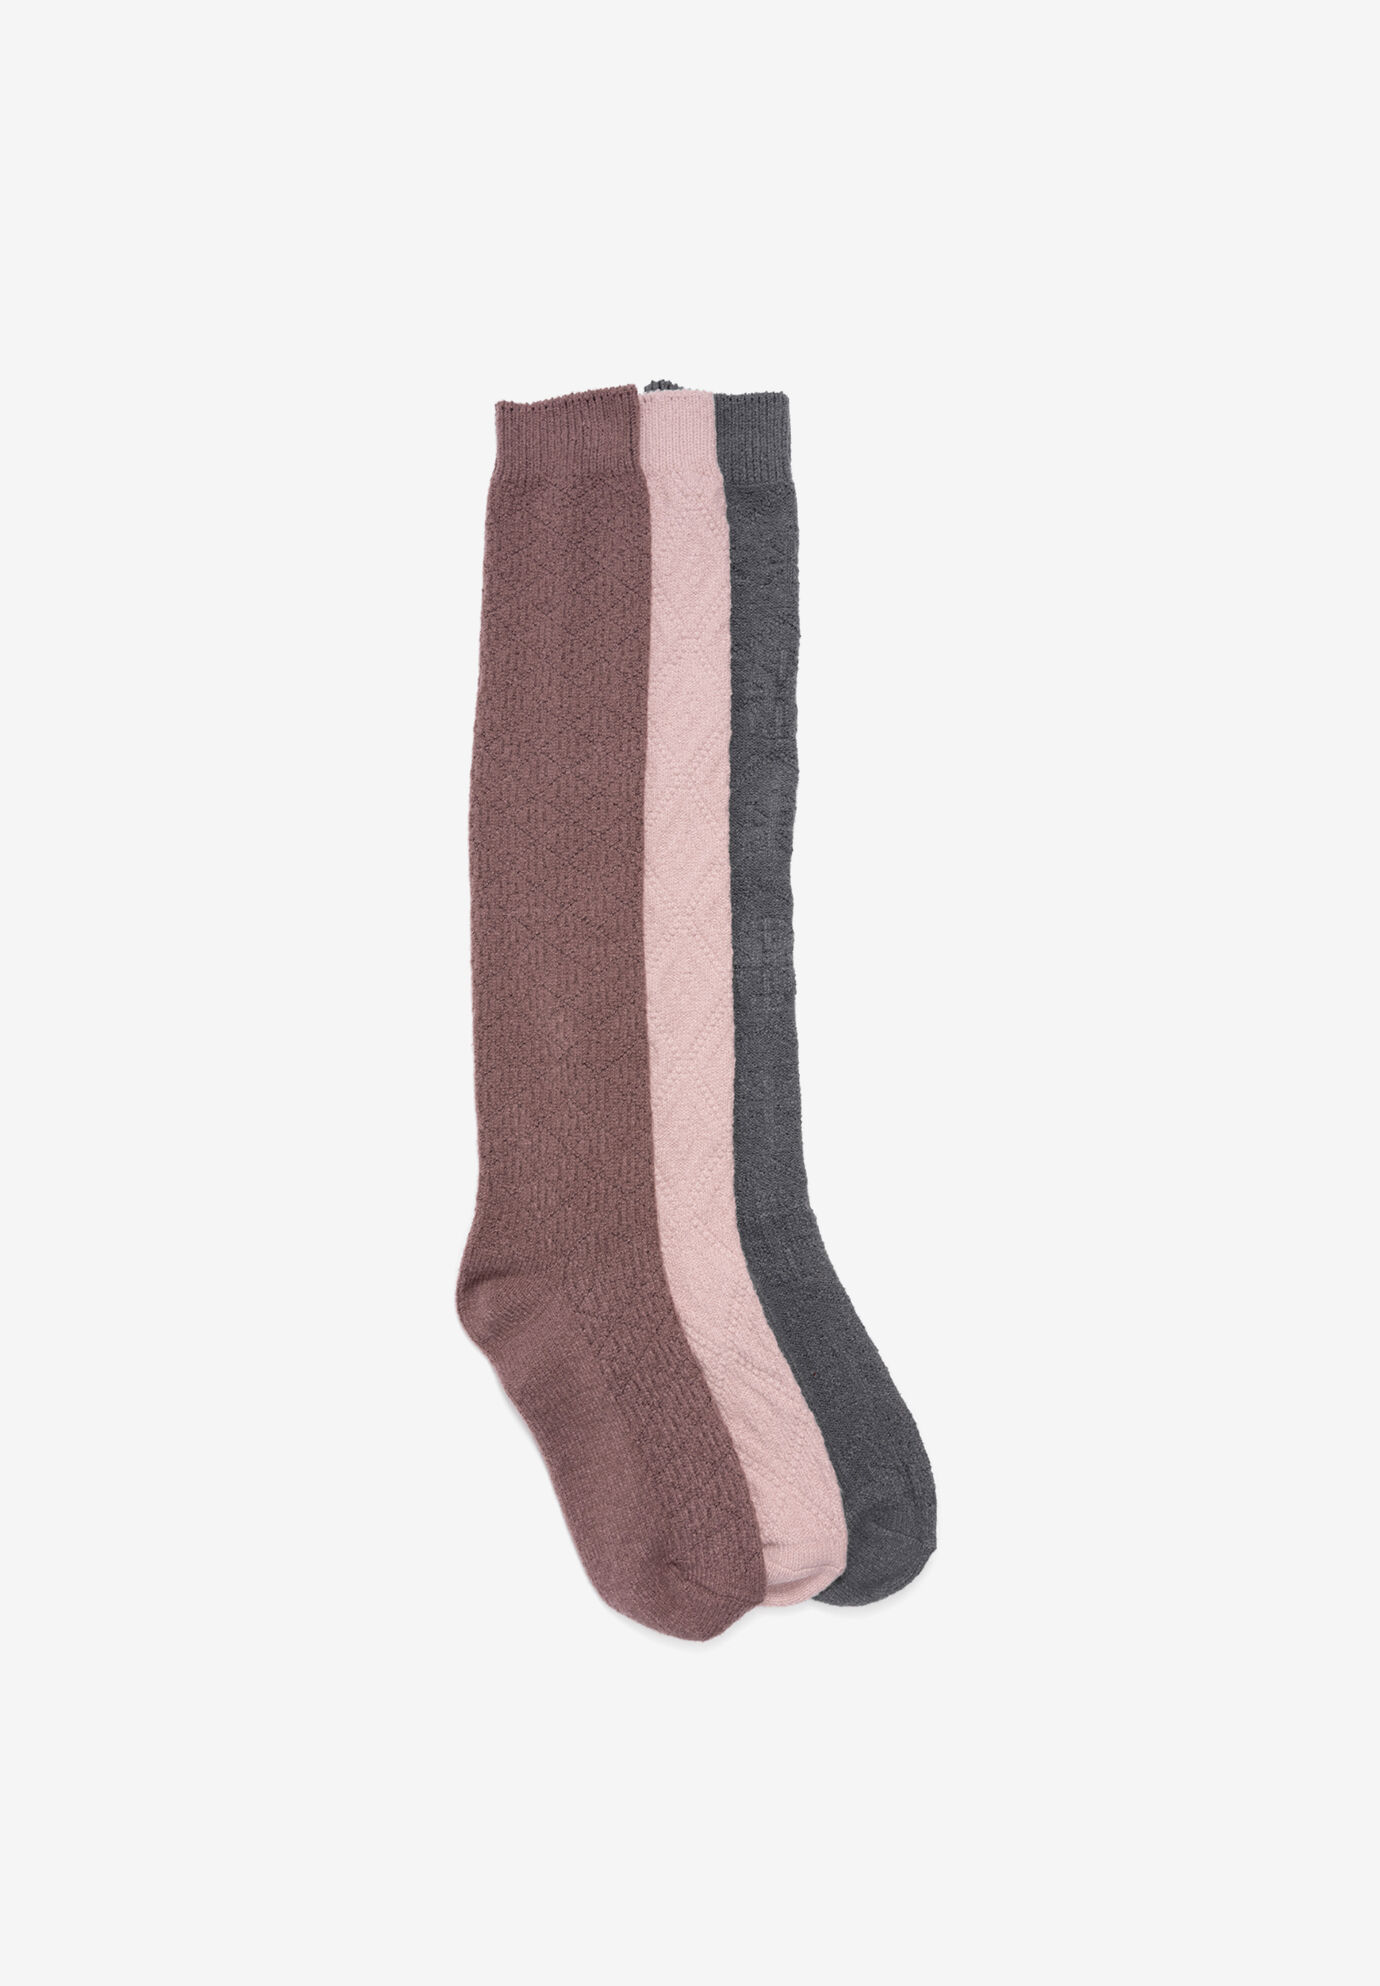 Women's 3 Pair Pack Knee High Socks by MUK LUKS in Muted Tone (Size ONE)